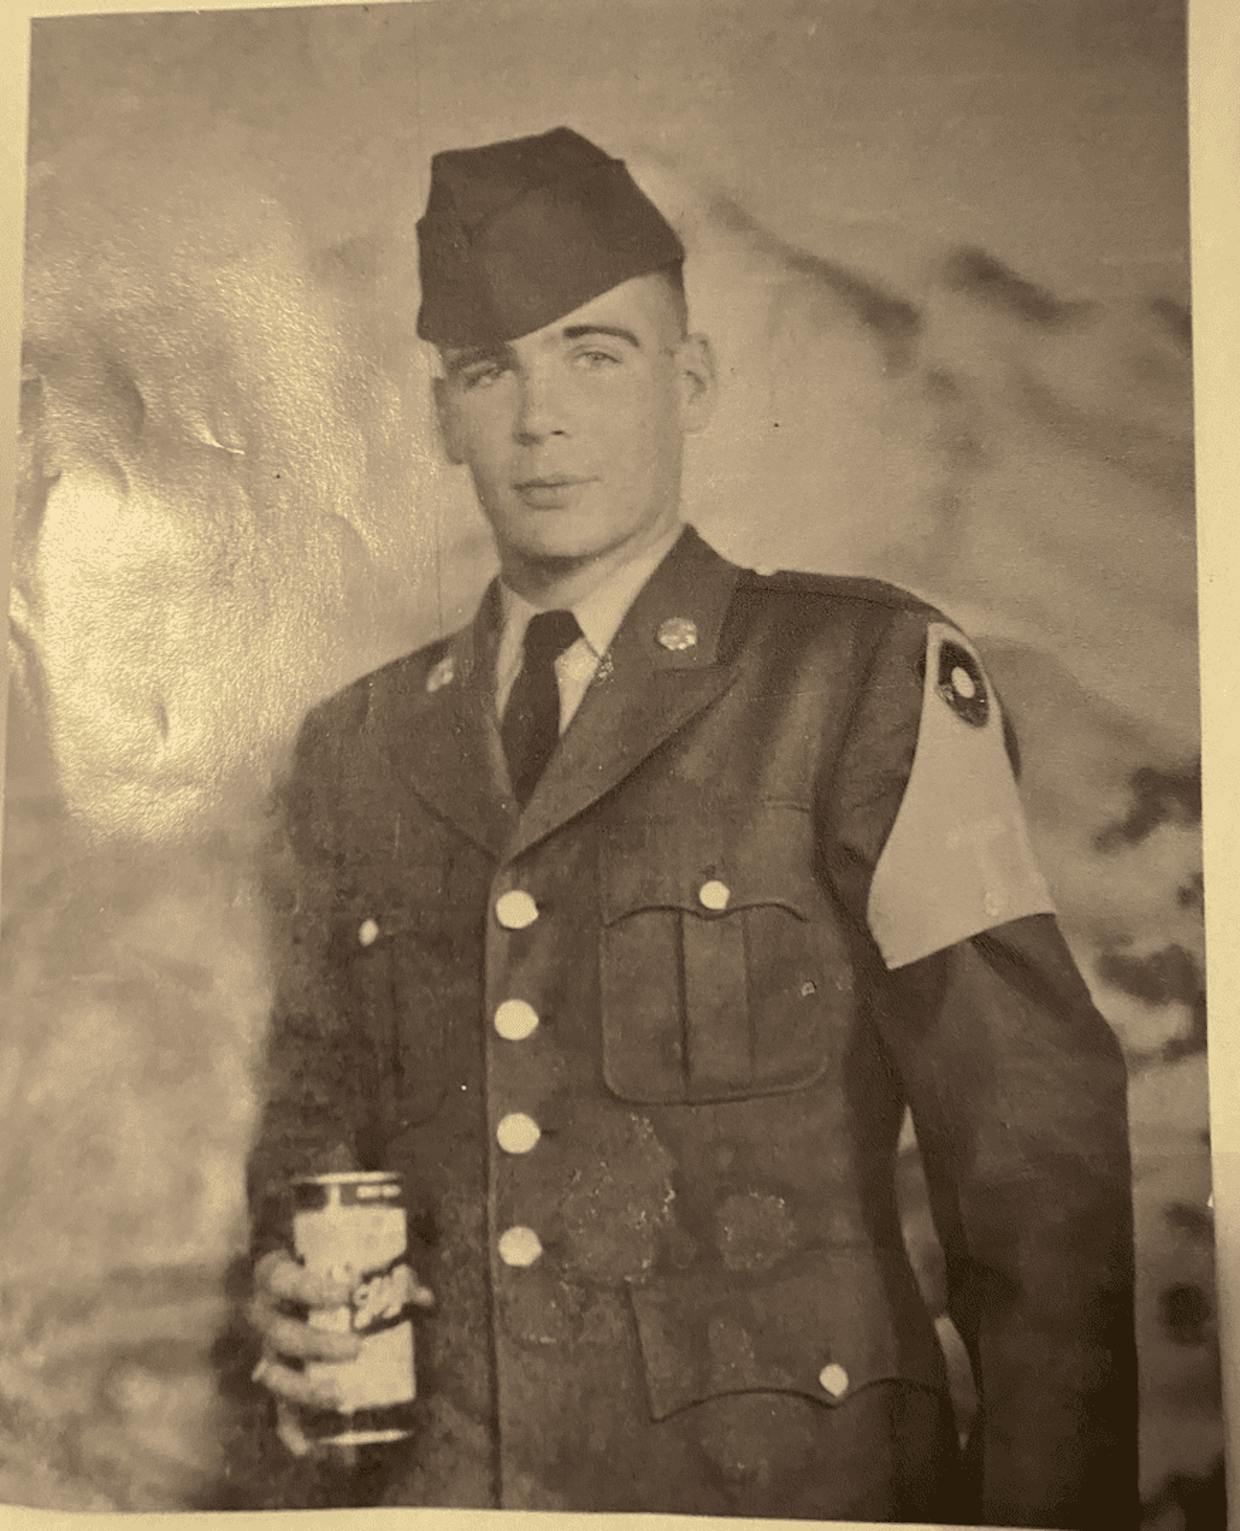 My grandfather, Clyde Knust, in uniform